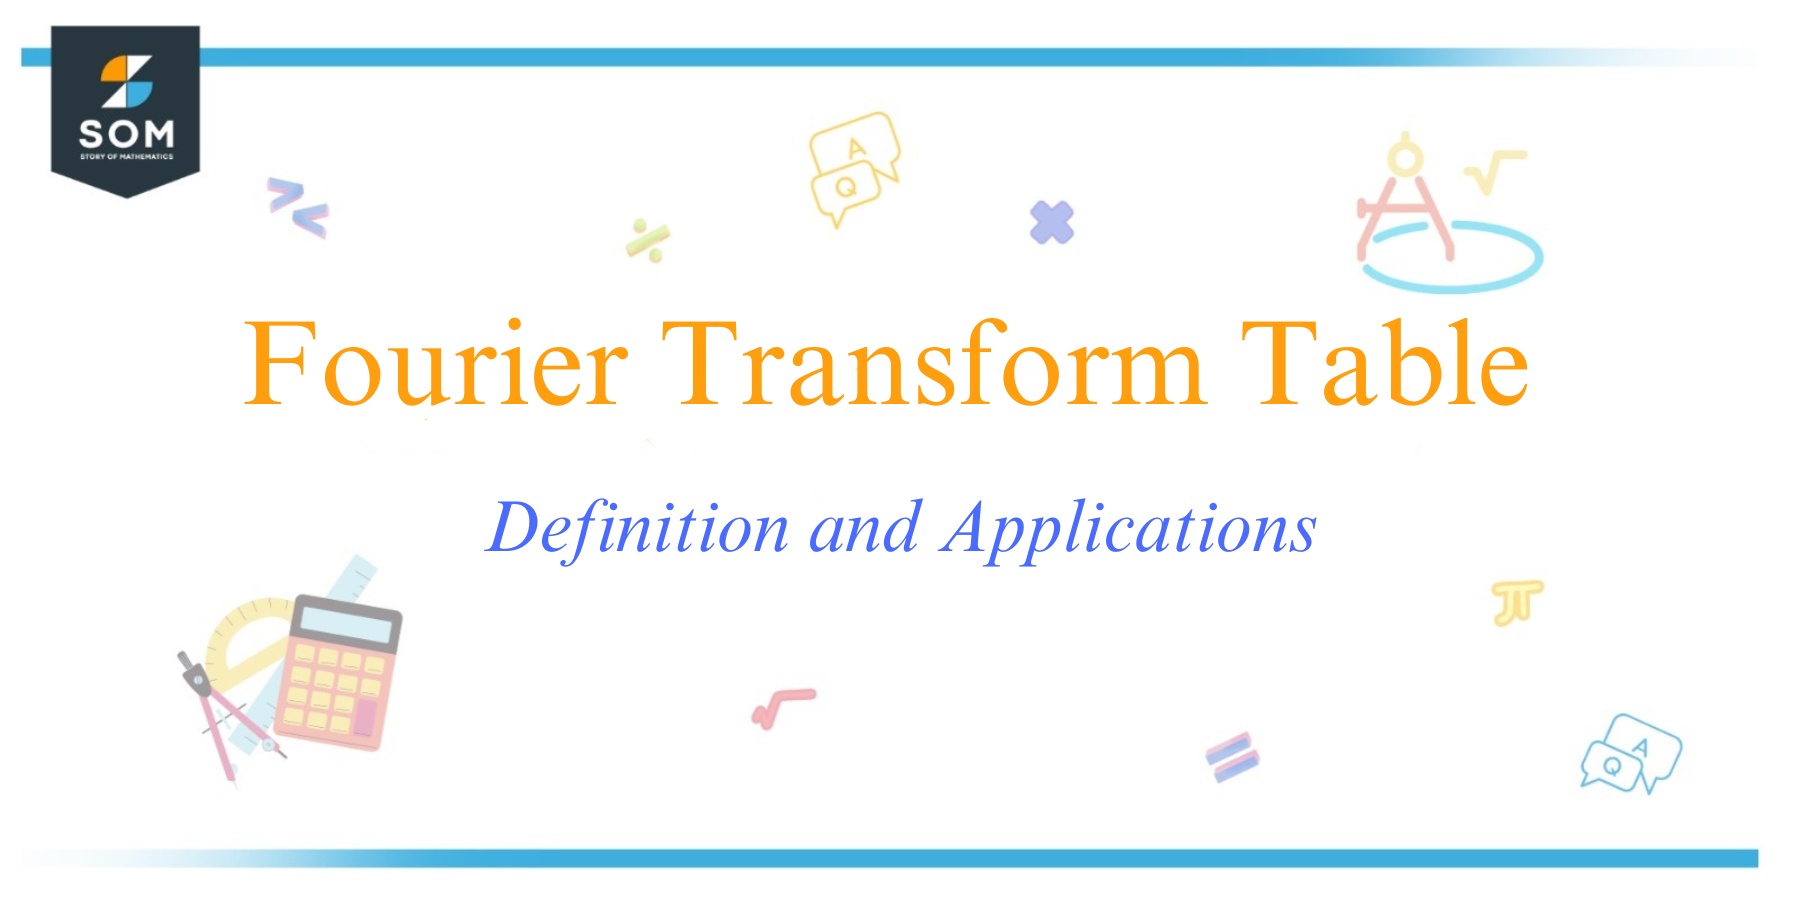 Fourier Transform Table Definition and Applications